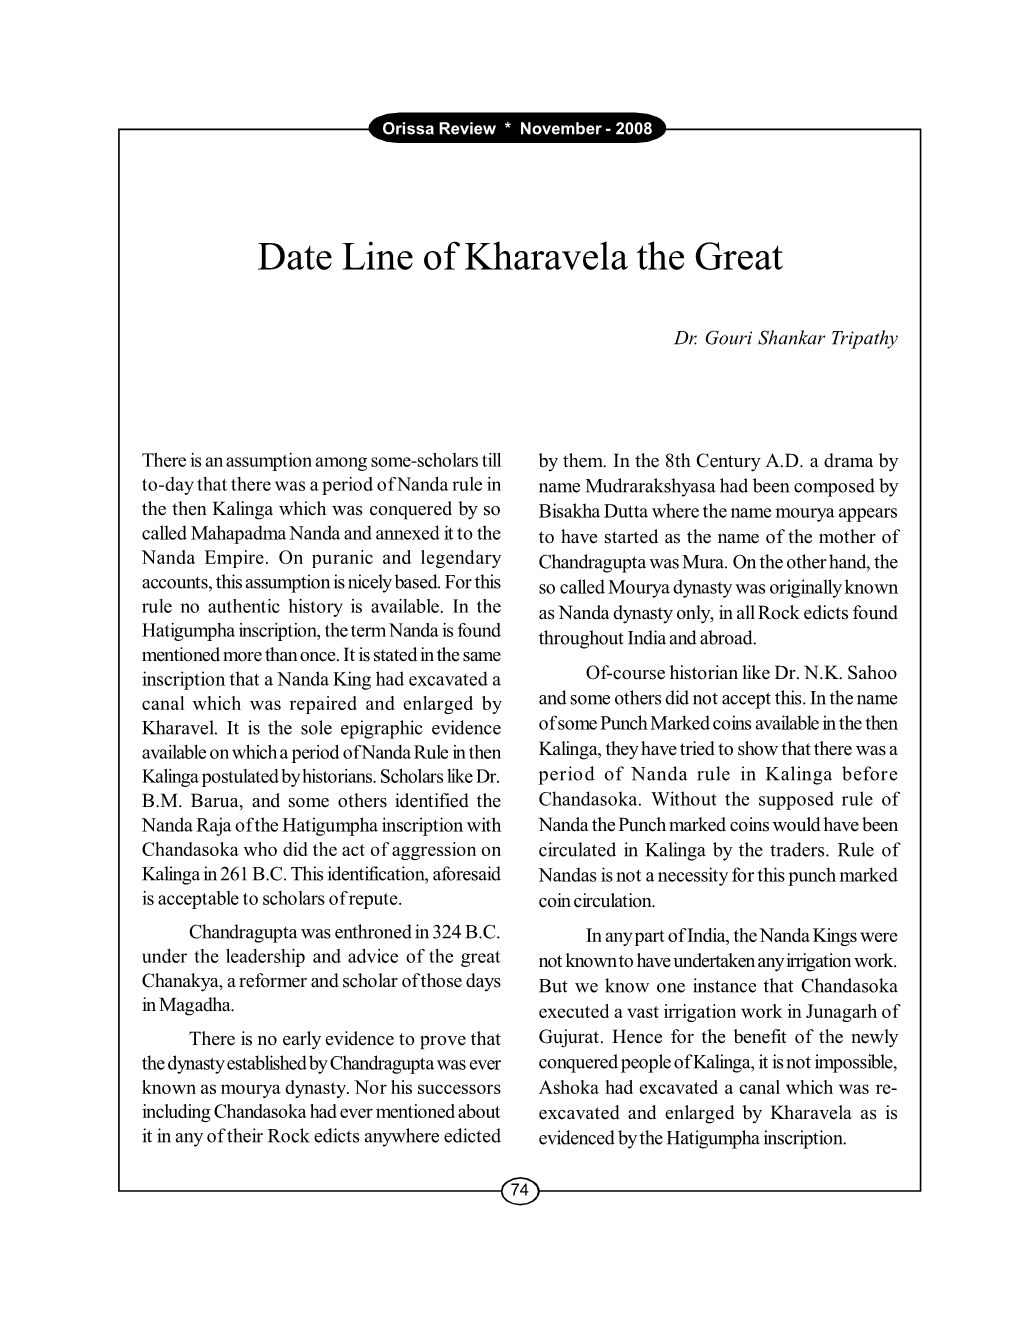 Date Line of Kharavela the Great